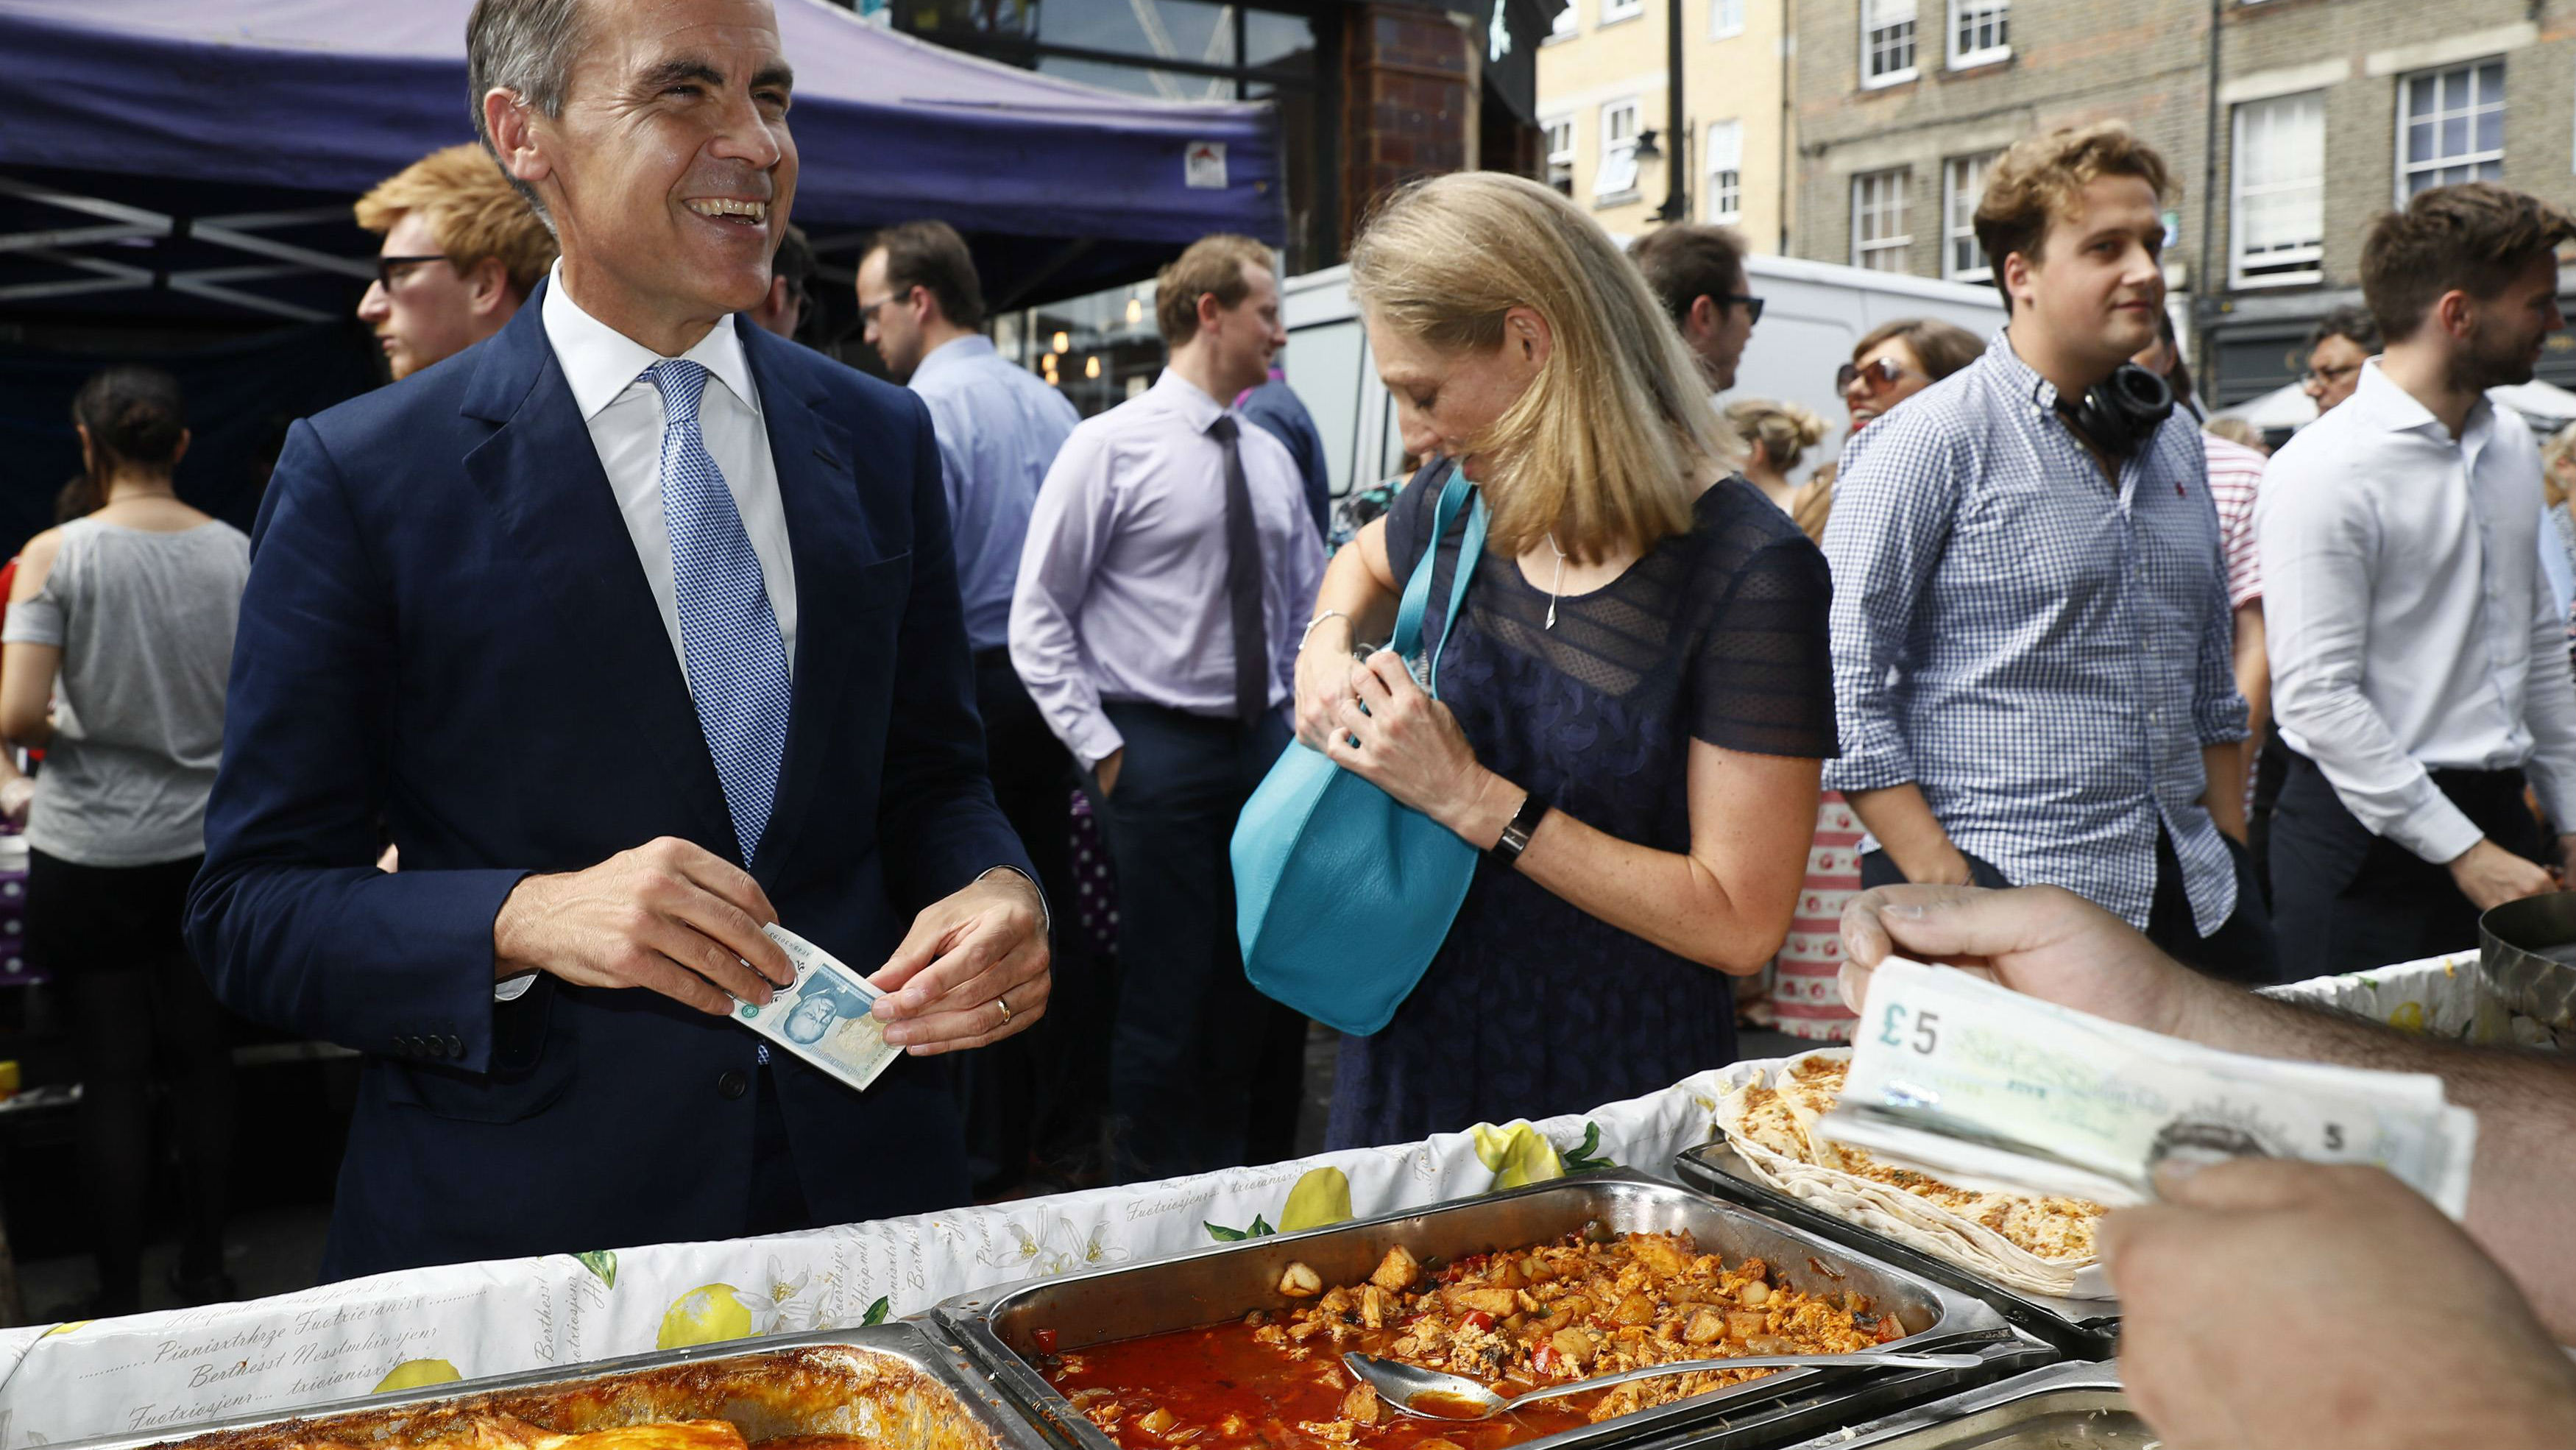 Mark Carney, Governor of the Bank of England, tries out the new £5 note